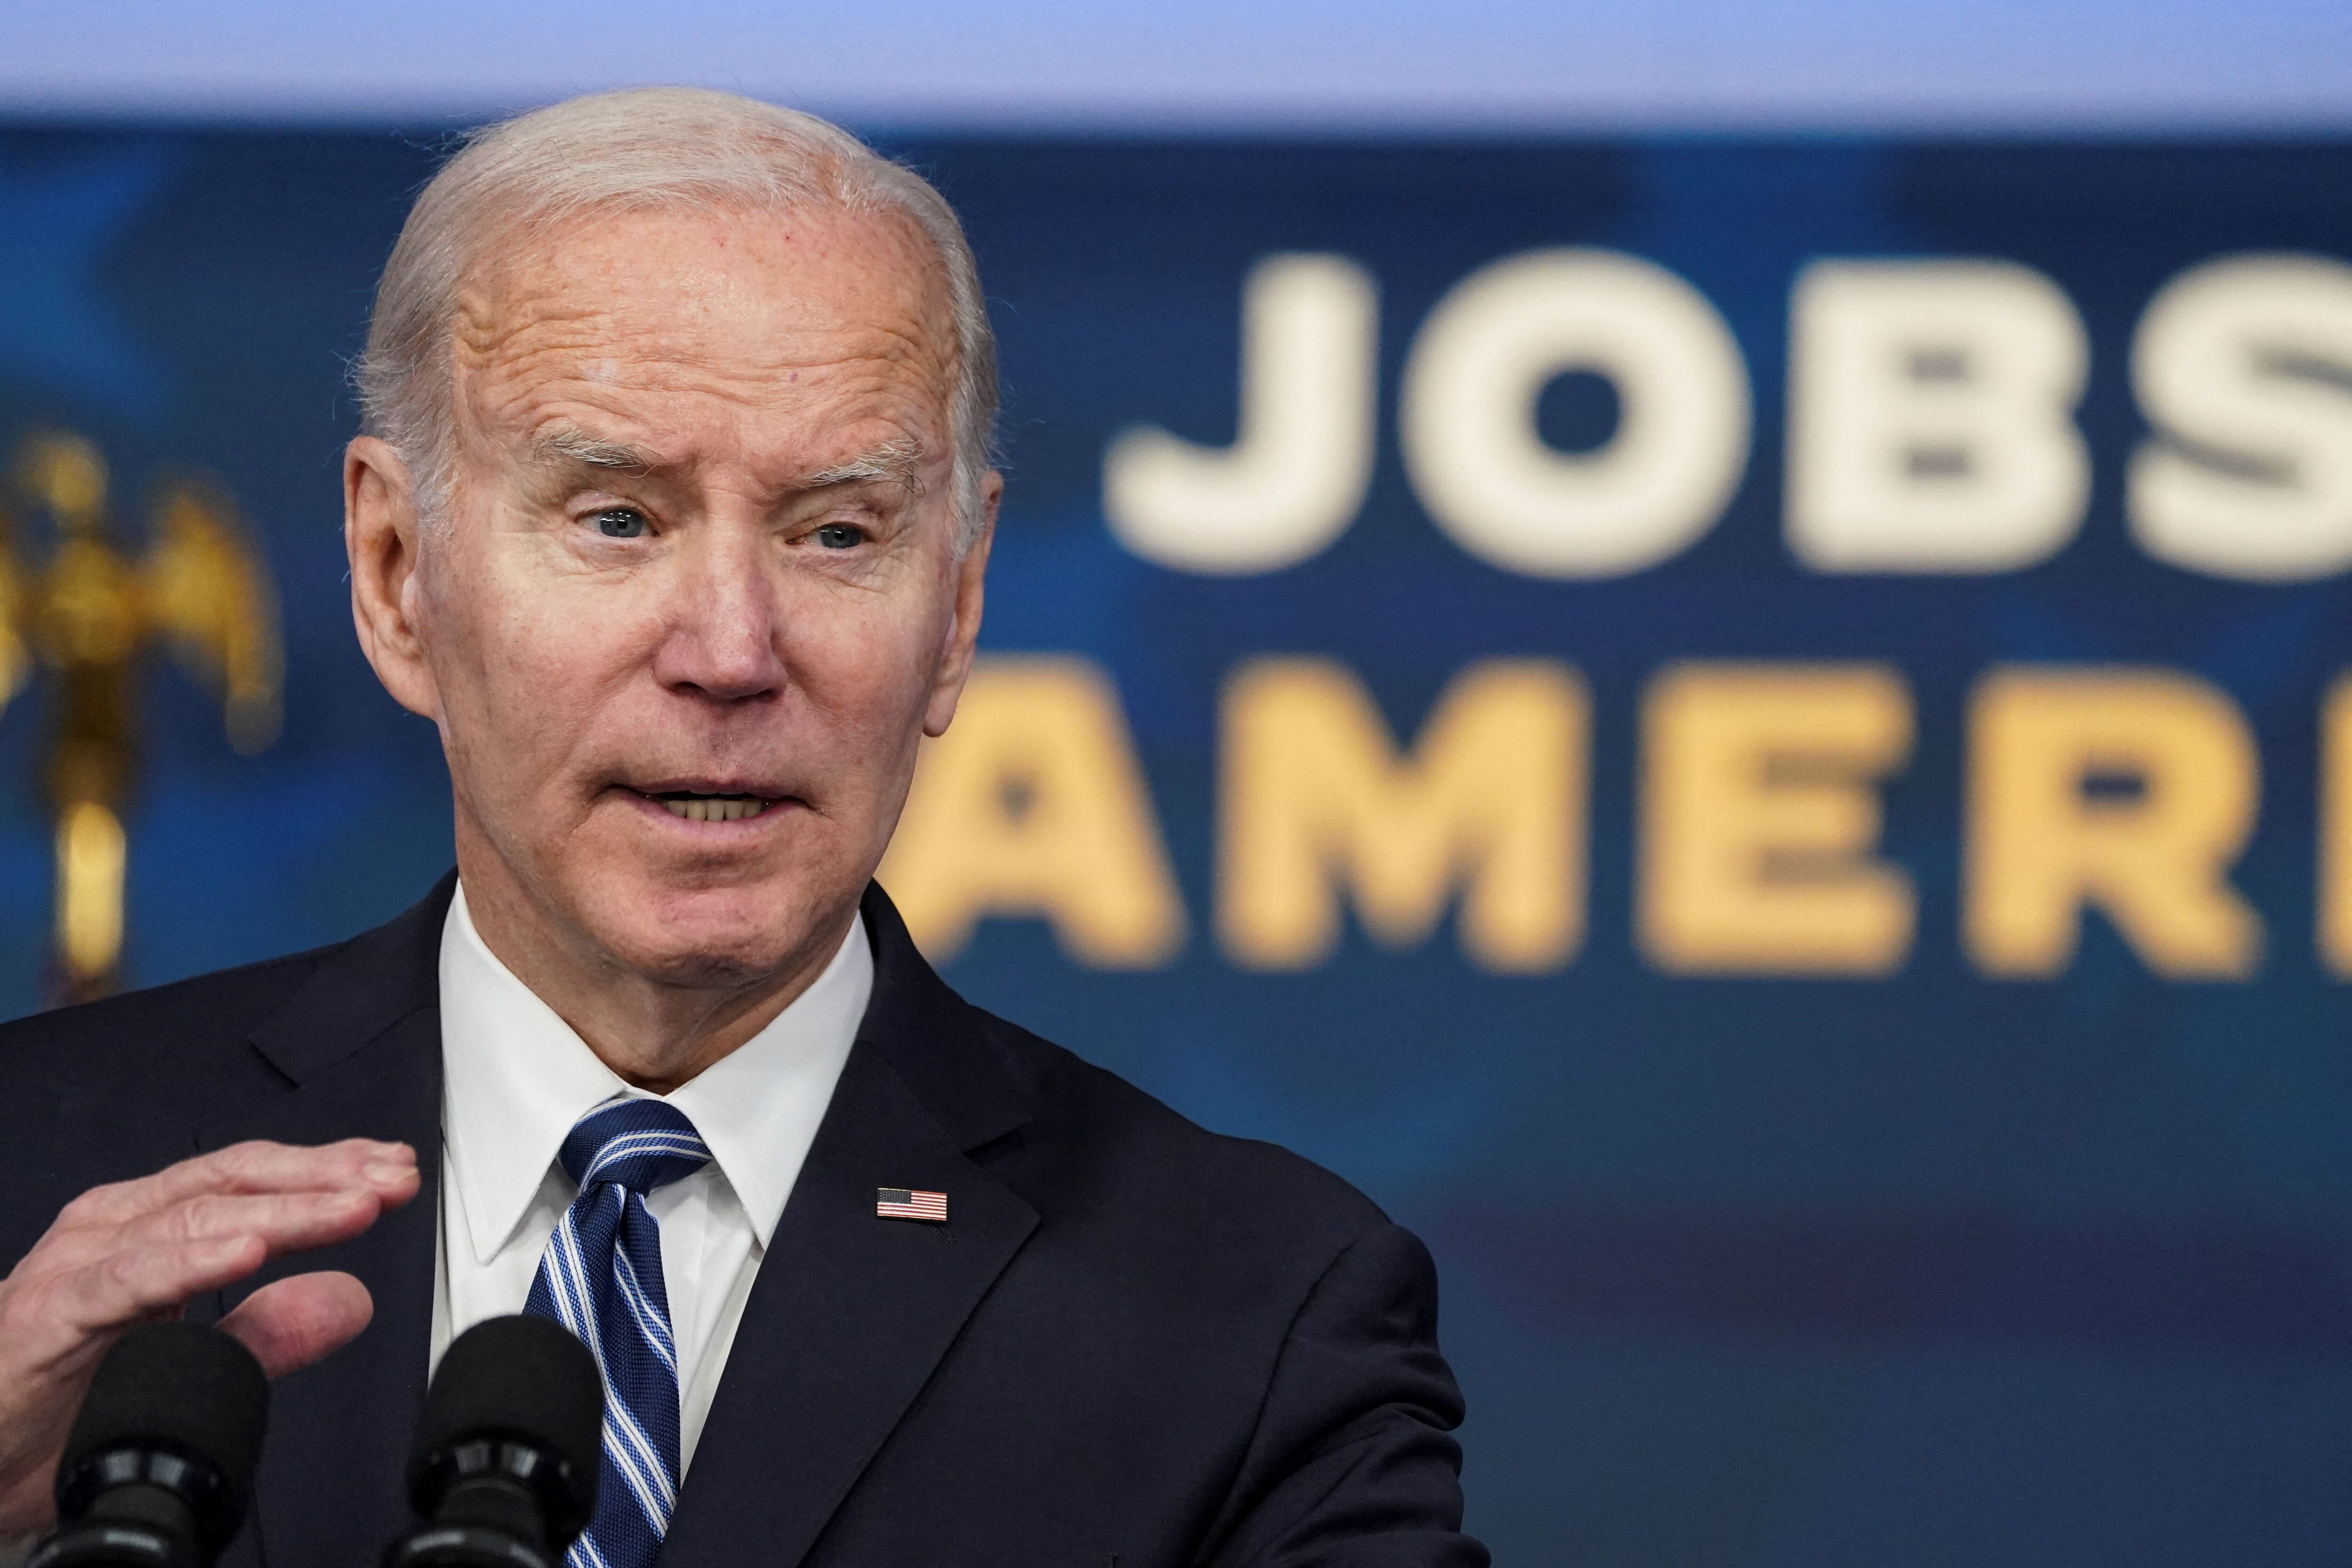 Biden lauds "strongest two years of job growth in history"